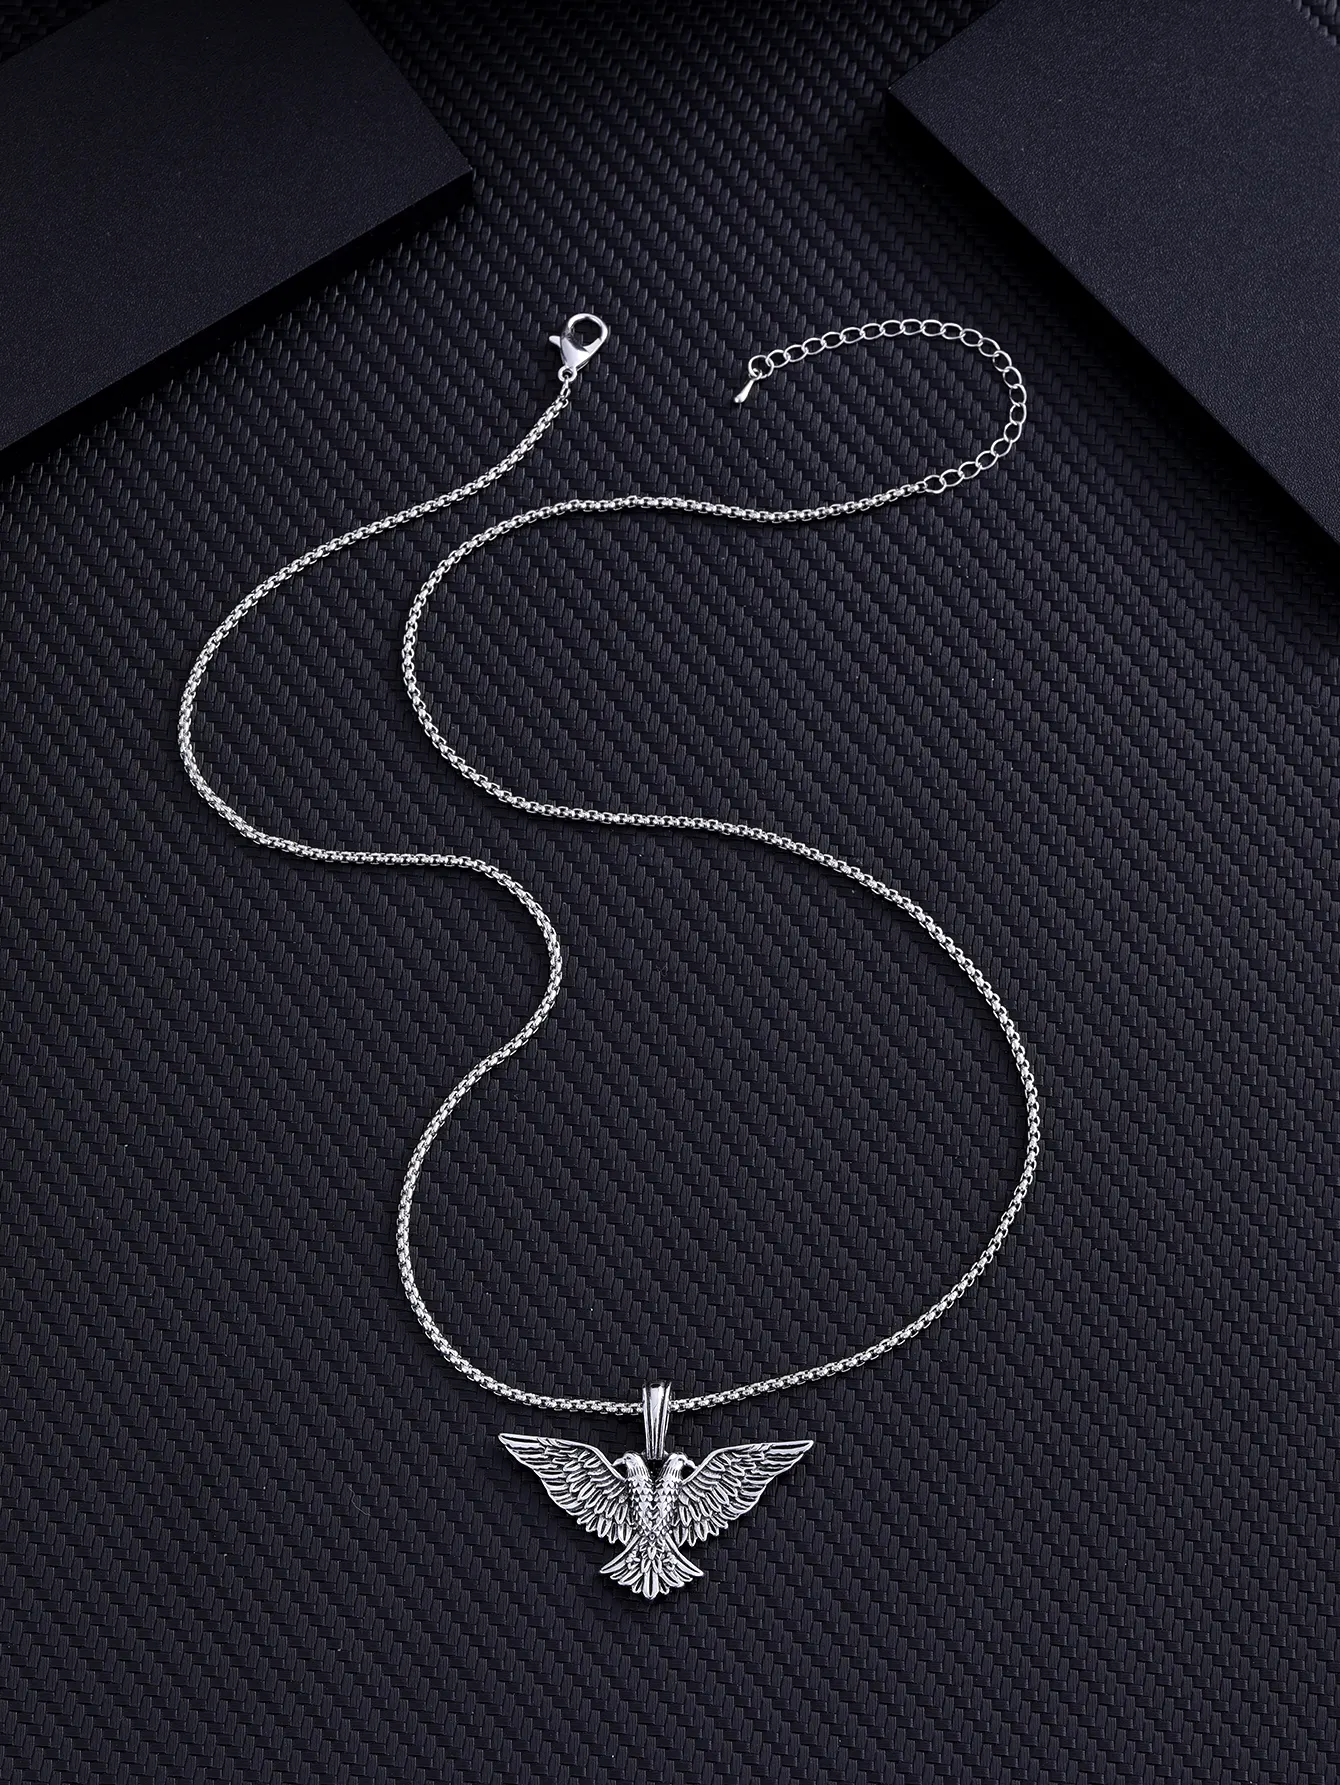 Jewelry European personality Hip hop style double headed eagle stainless steel pendant necklace